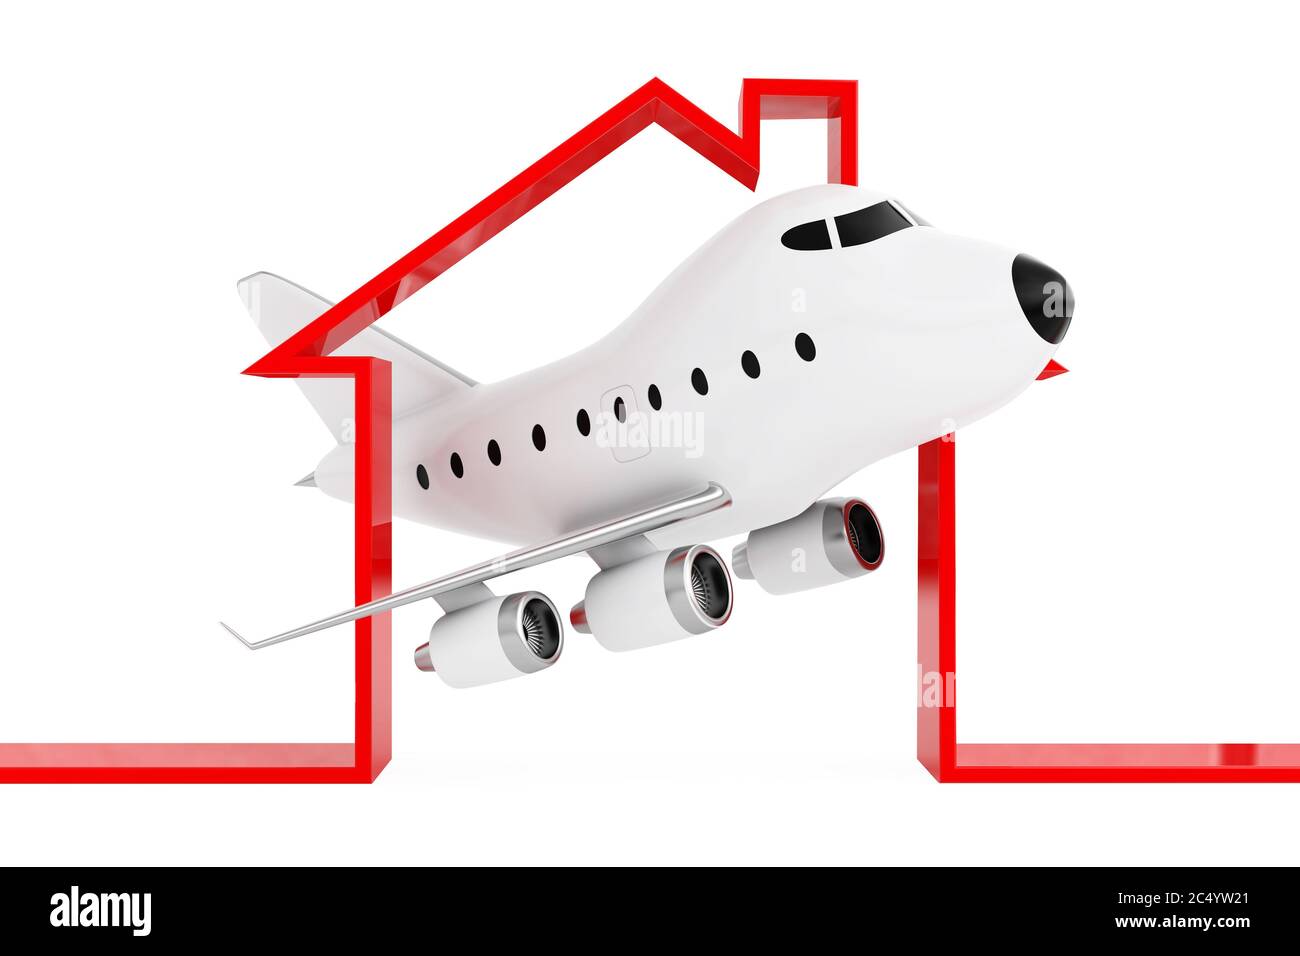 Cartoon Toy Jet Airplane in Abstract Airport or Hangar Building Shape on a white background. 3d Rendering. Stock Photo